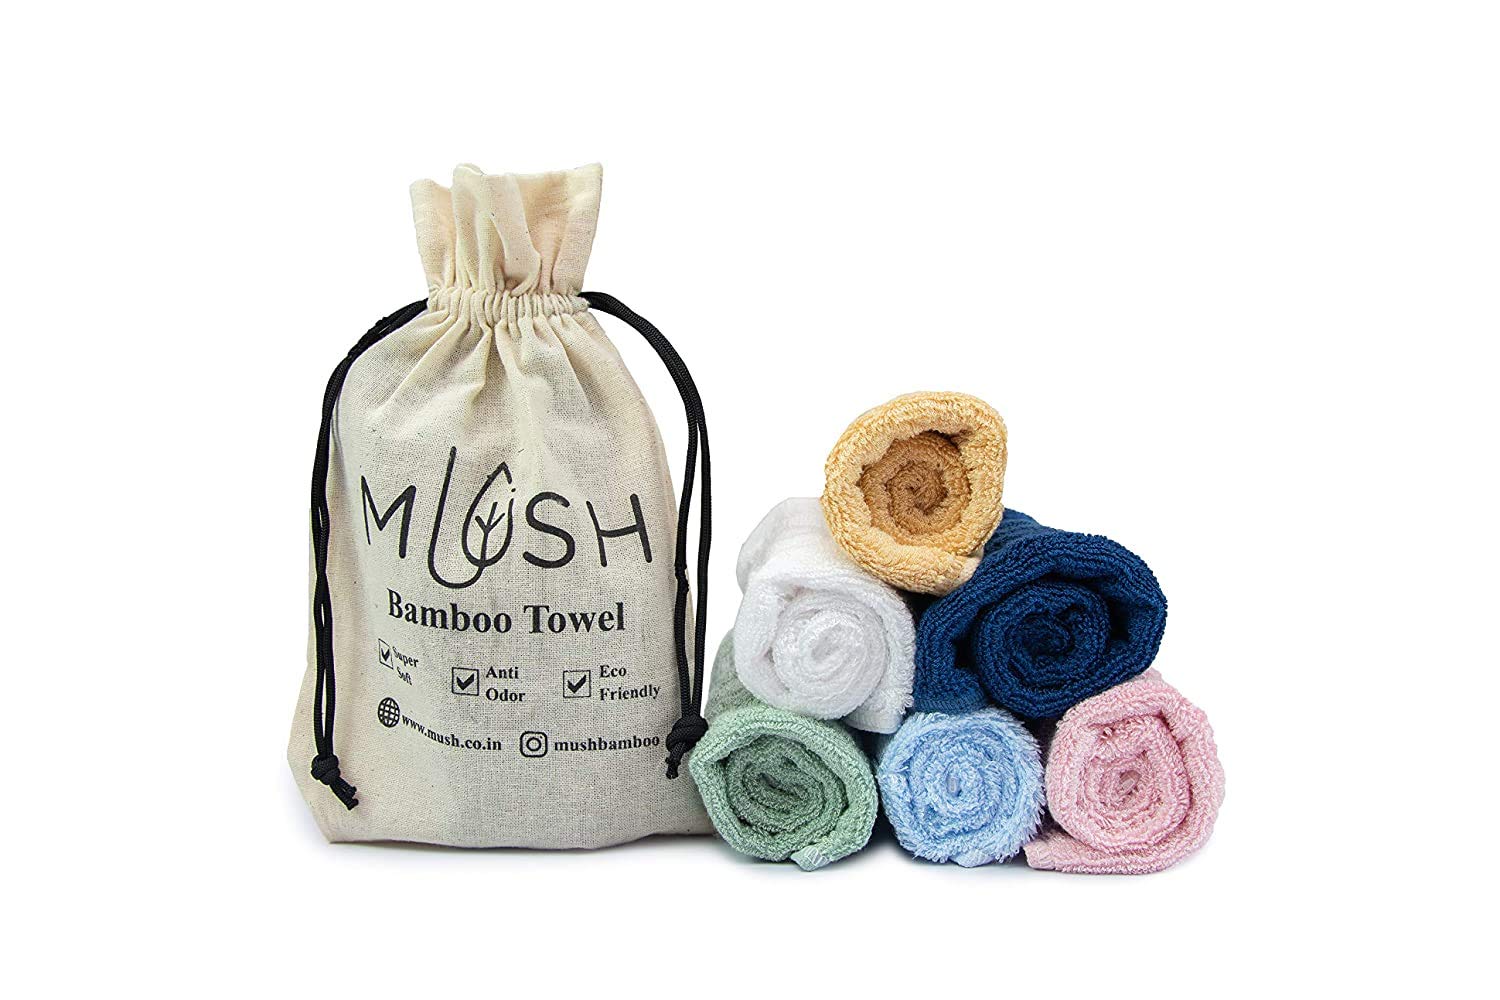 Mush 100% Bamboo Face Towel | Ultra Soft, Absorbent, & Quick Dry Towels for Facewash, Gym, Travel | Suitable for Sensitive Skin | 13 x 13 Inches | 500 GSM Pack of 3 -(Khakhi, Cream & Sky Blue)